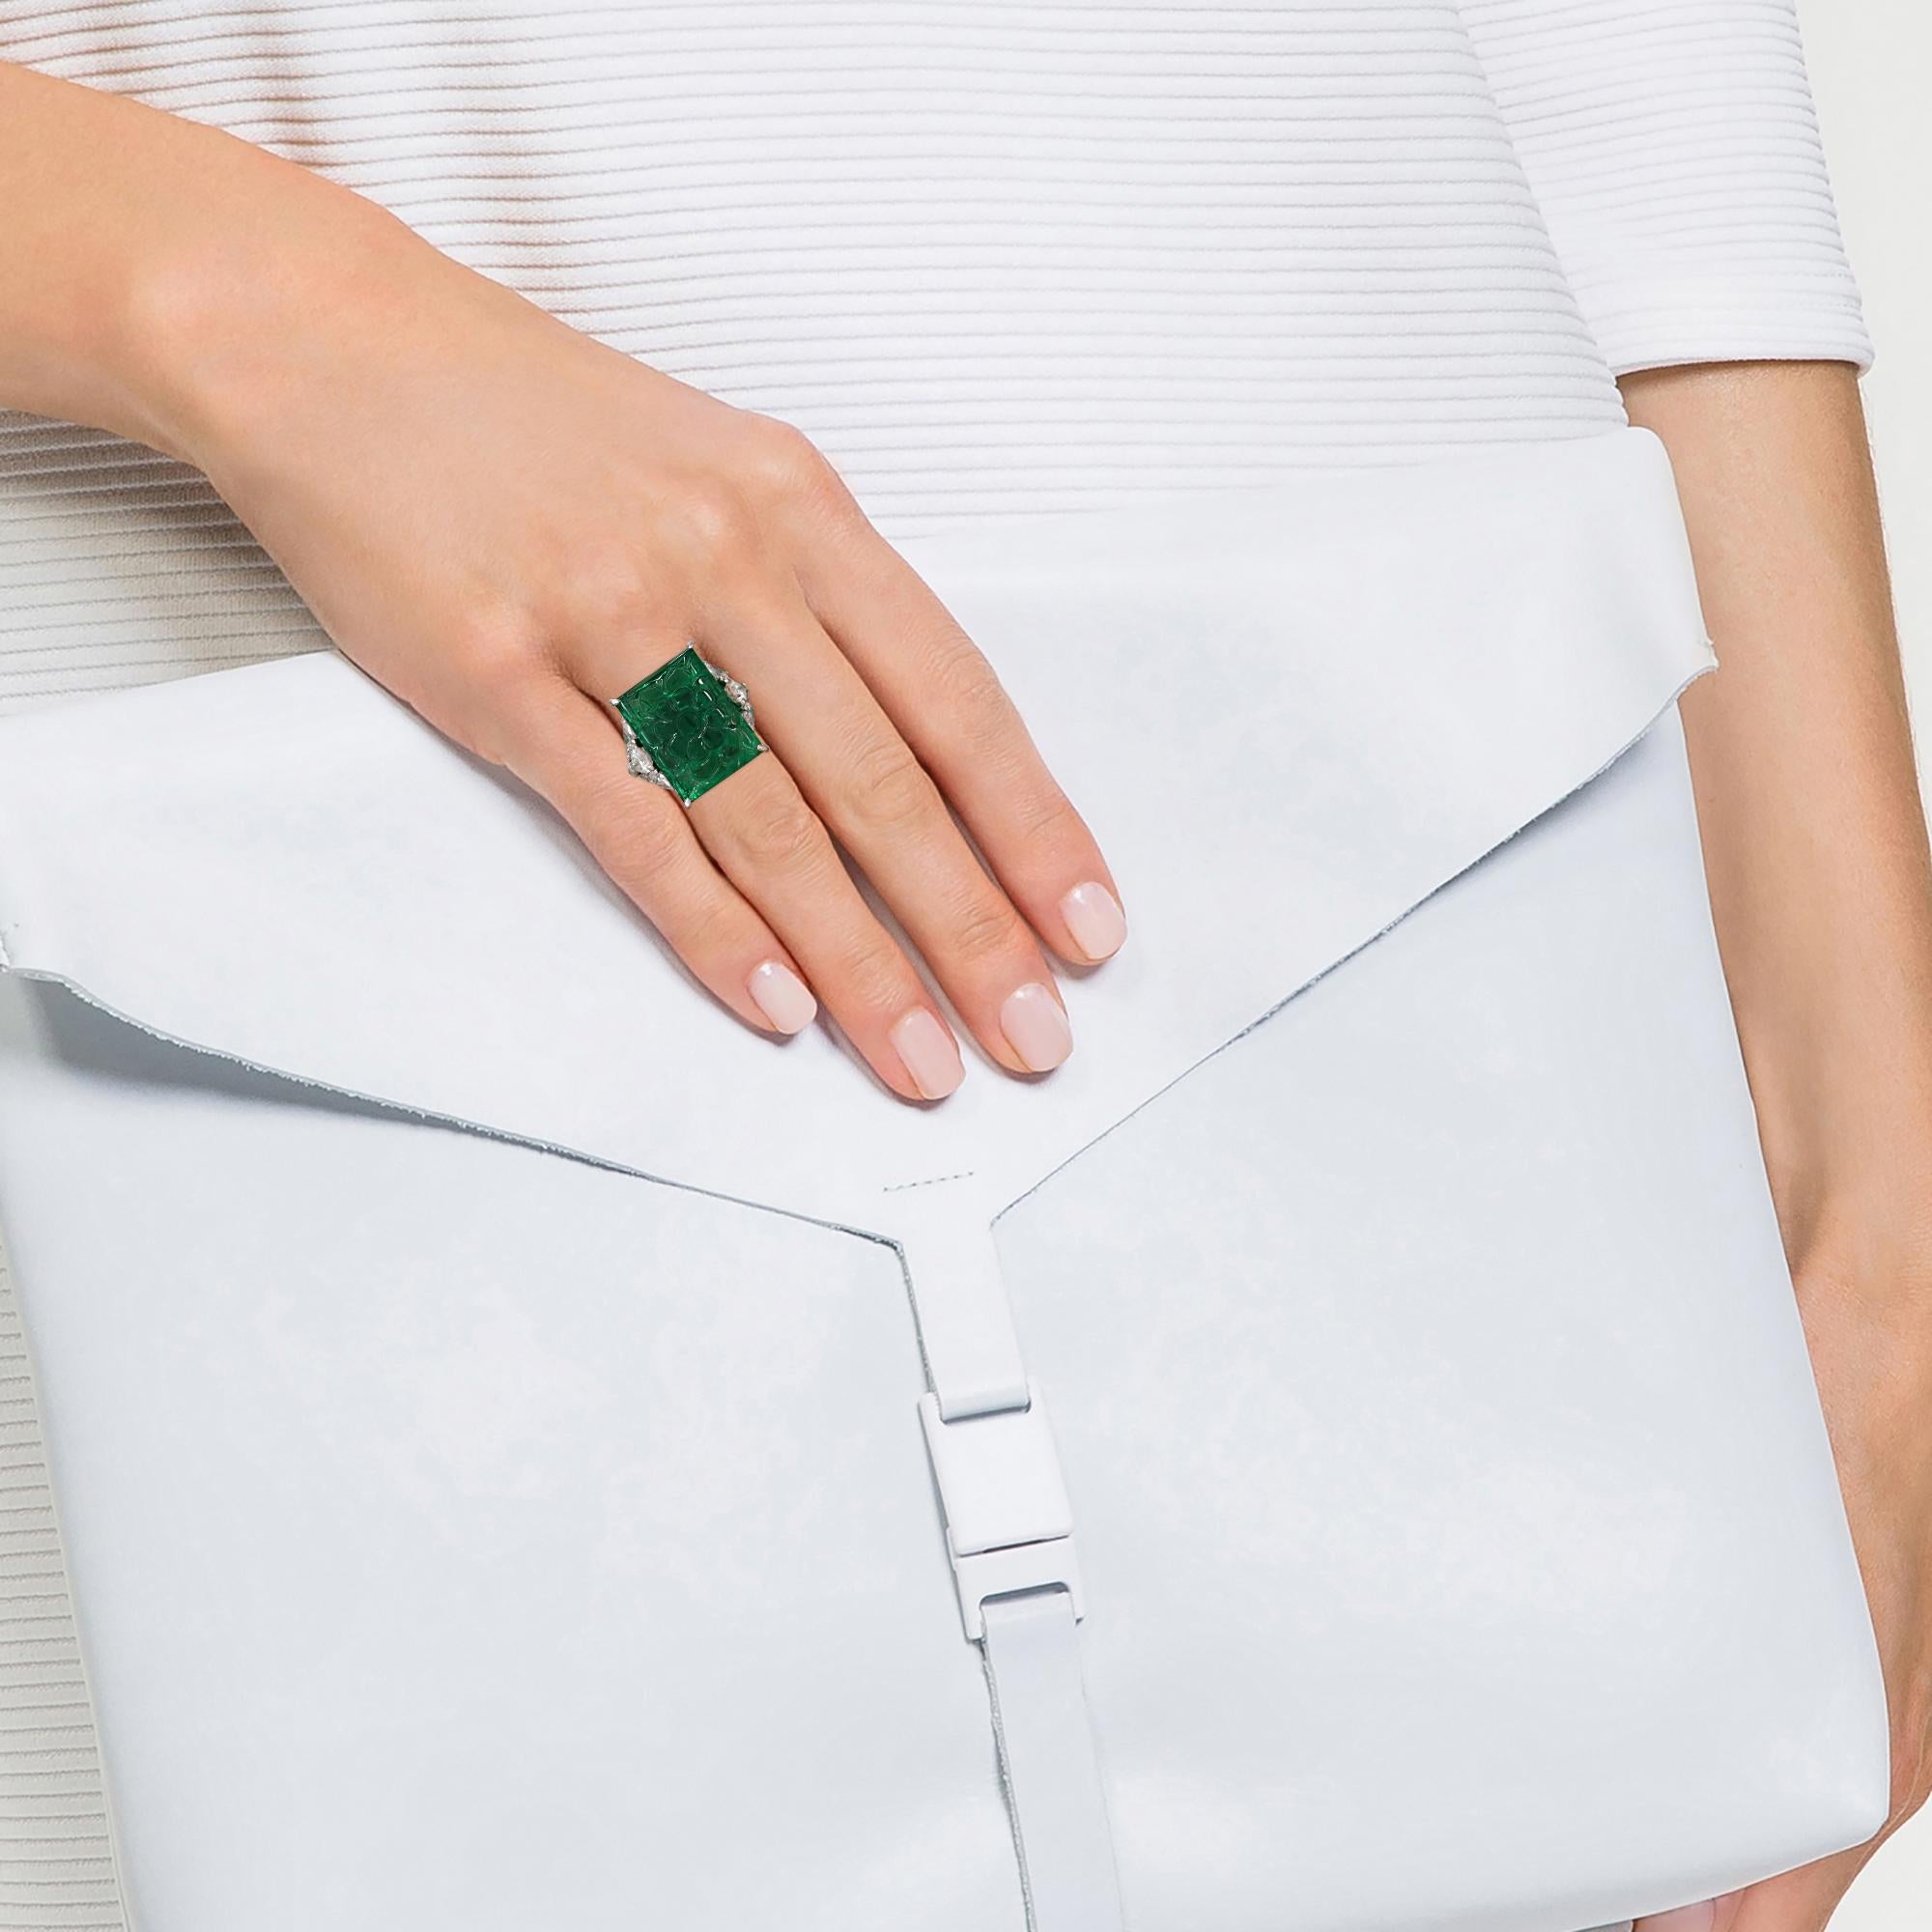 Upon viewing this extraordinary David Morris emerald ring, you come to understand why this enigmatic jewel has been so desired throughout history, and continues to captivate the women of today.

The ring’s remarkable, 15 carat cushion-cut Zambian